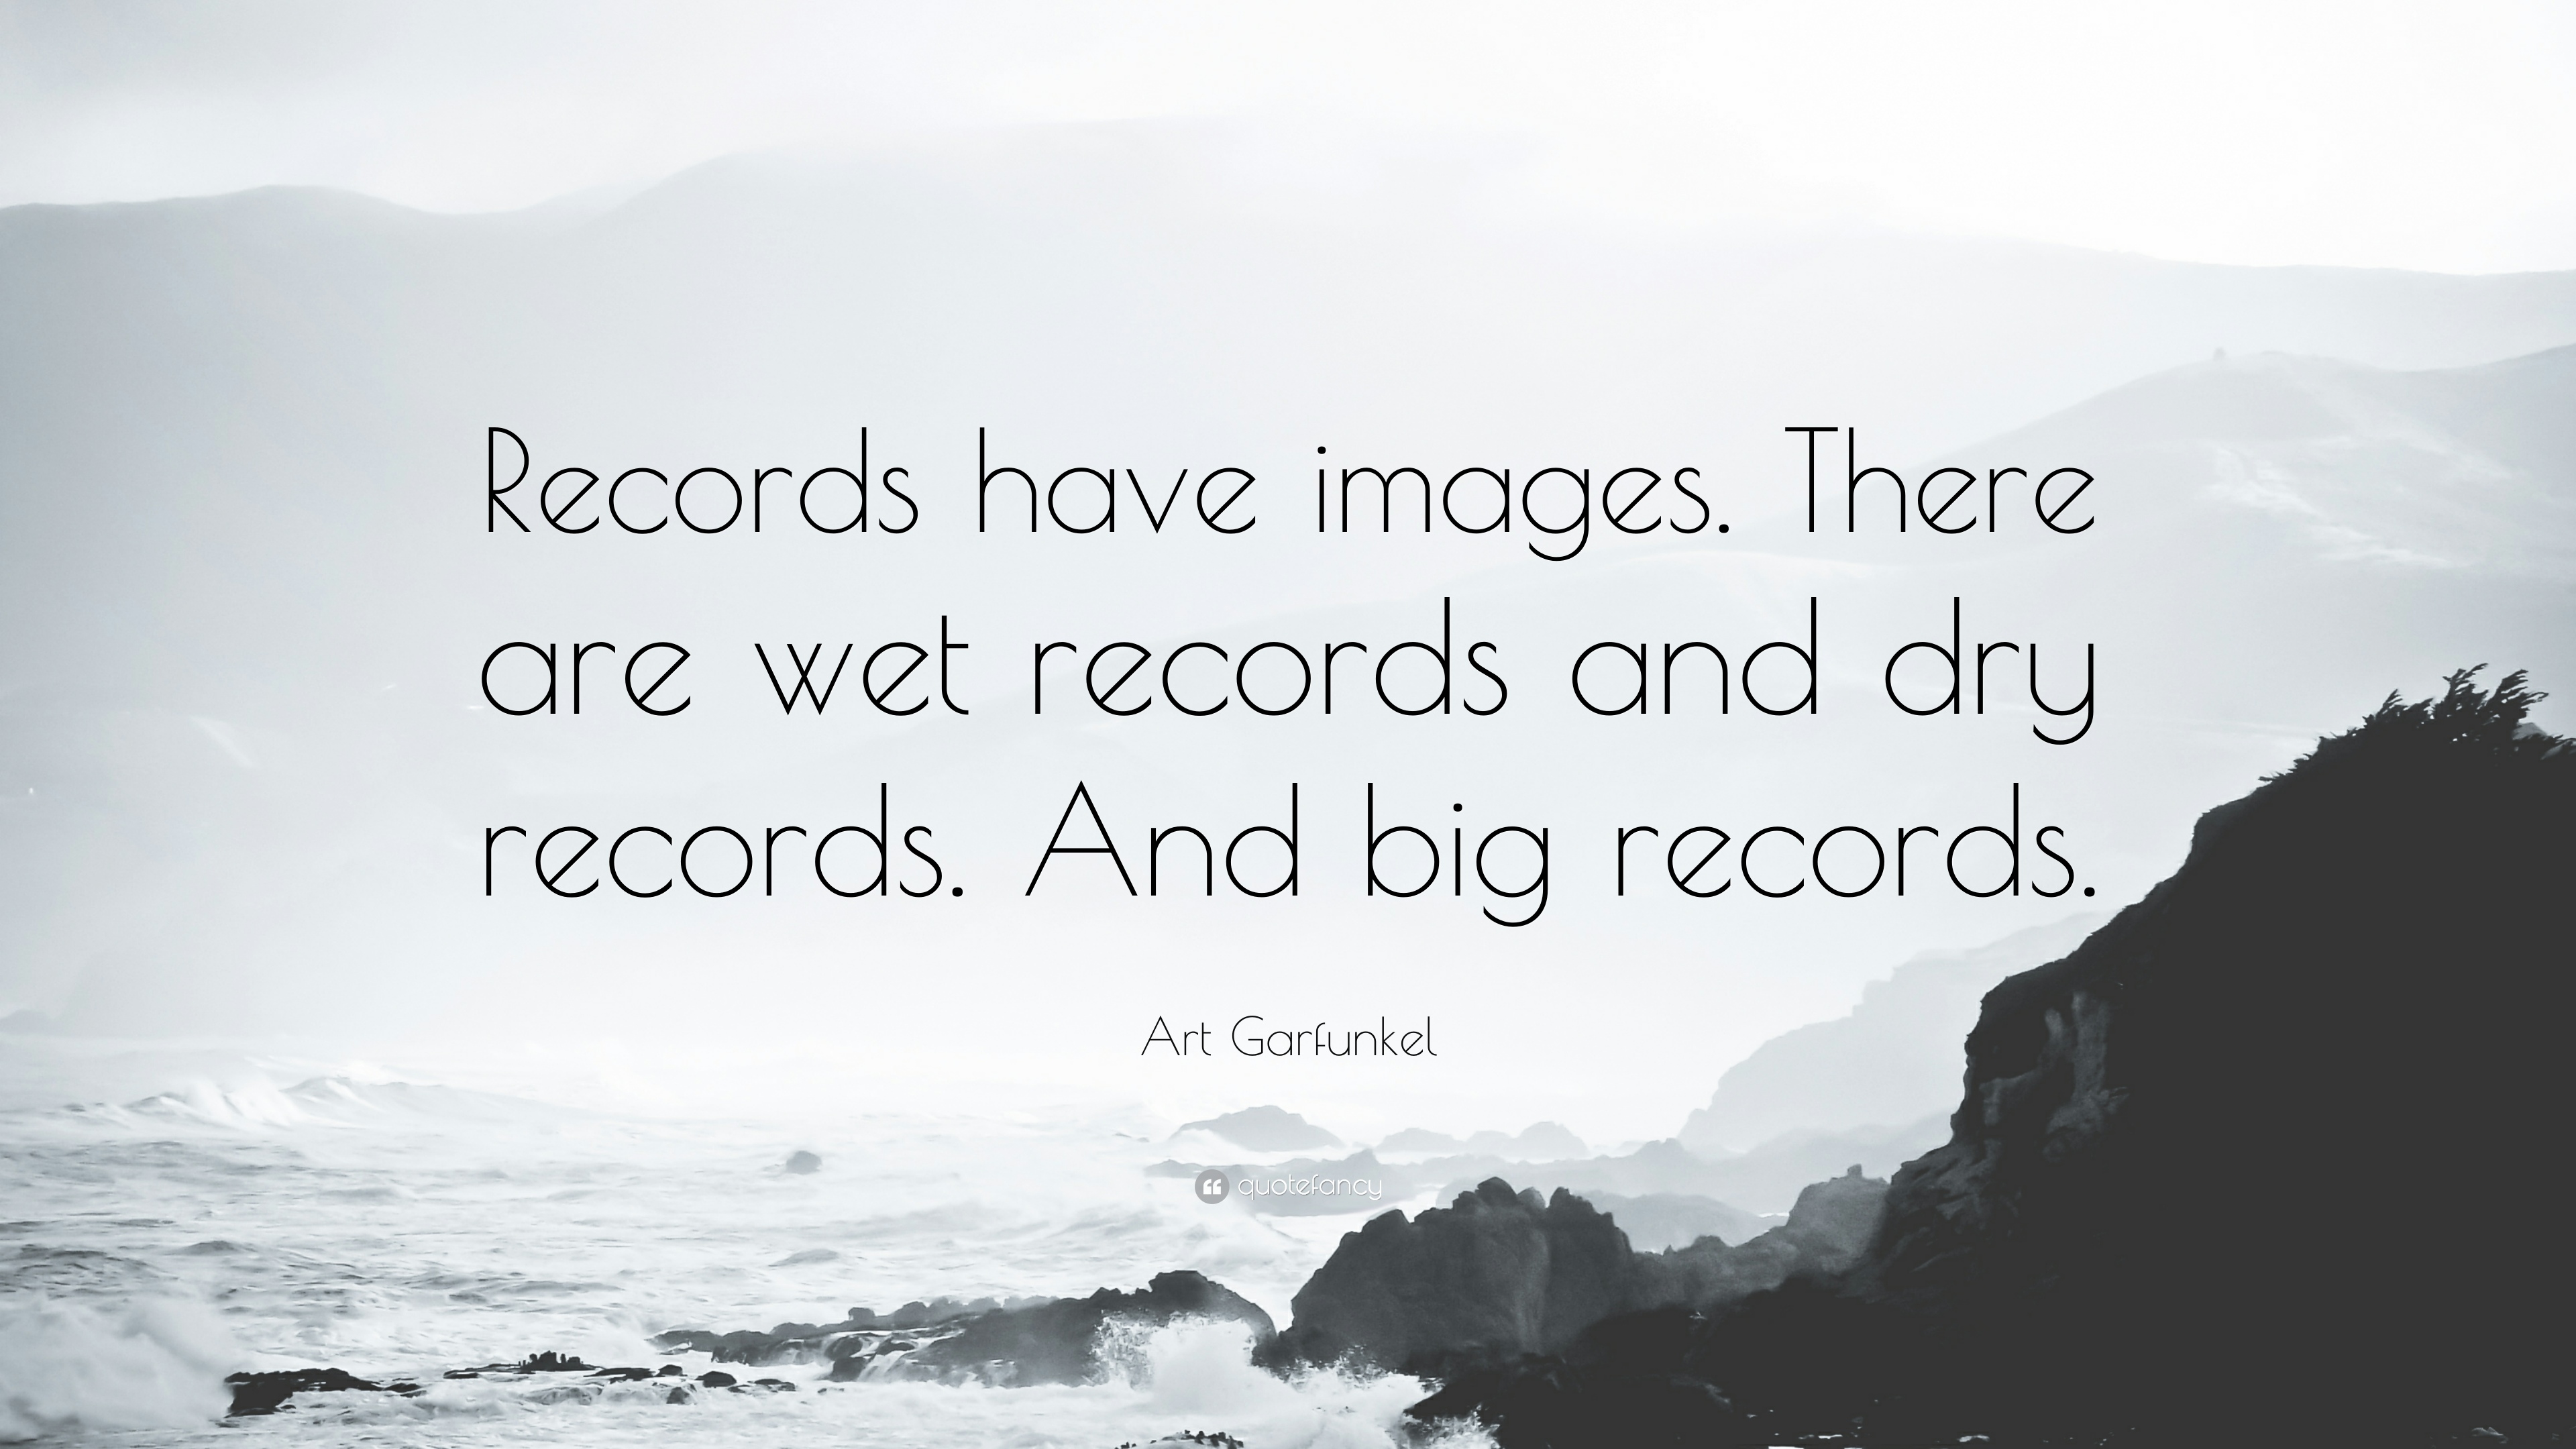 Art Garfunkel Quote: “Records have image. There are wet records